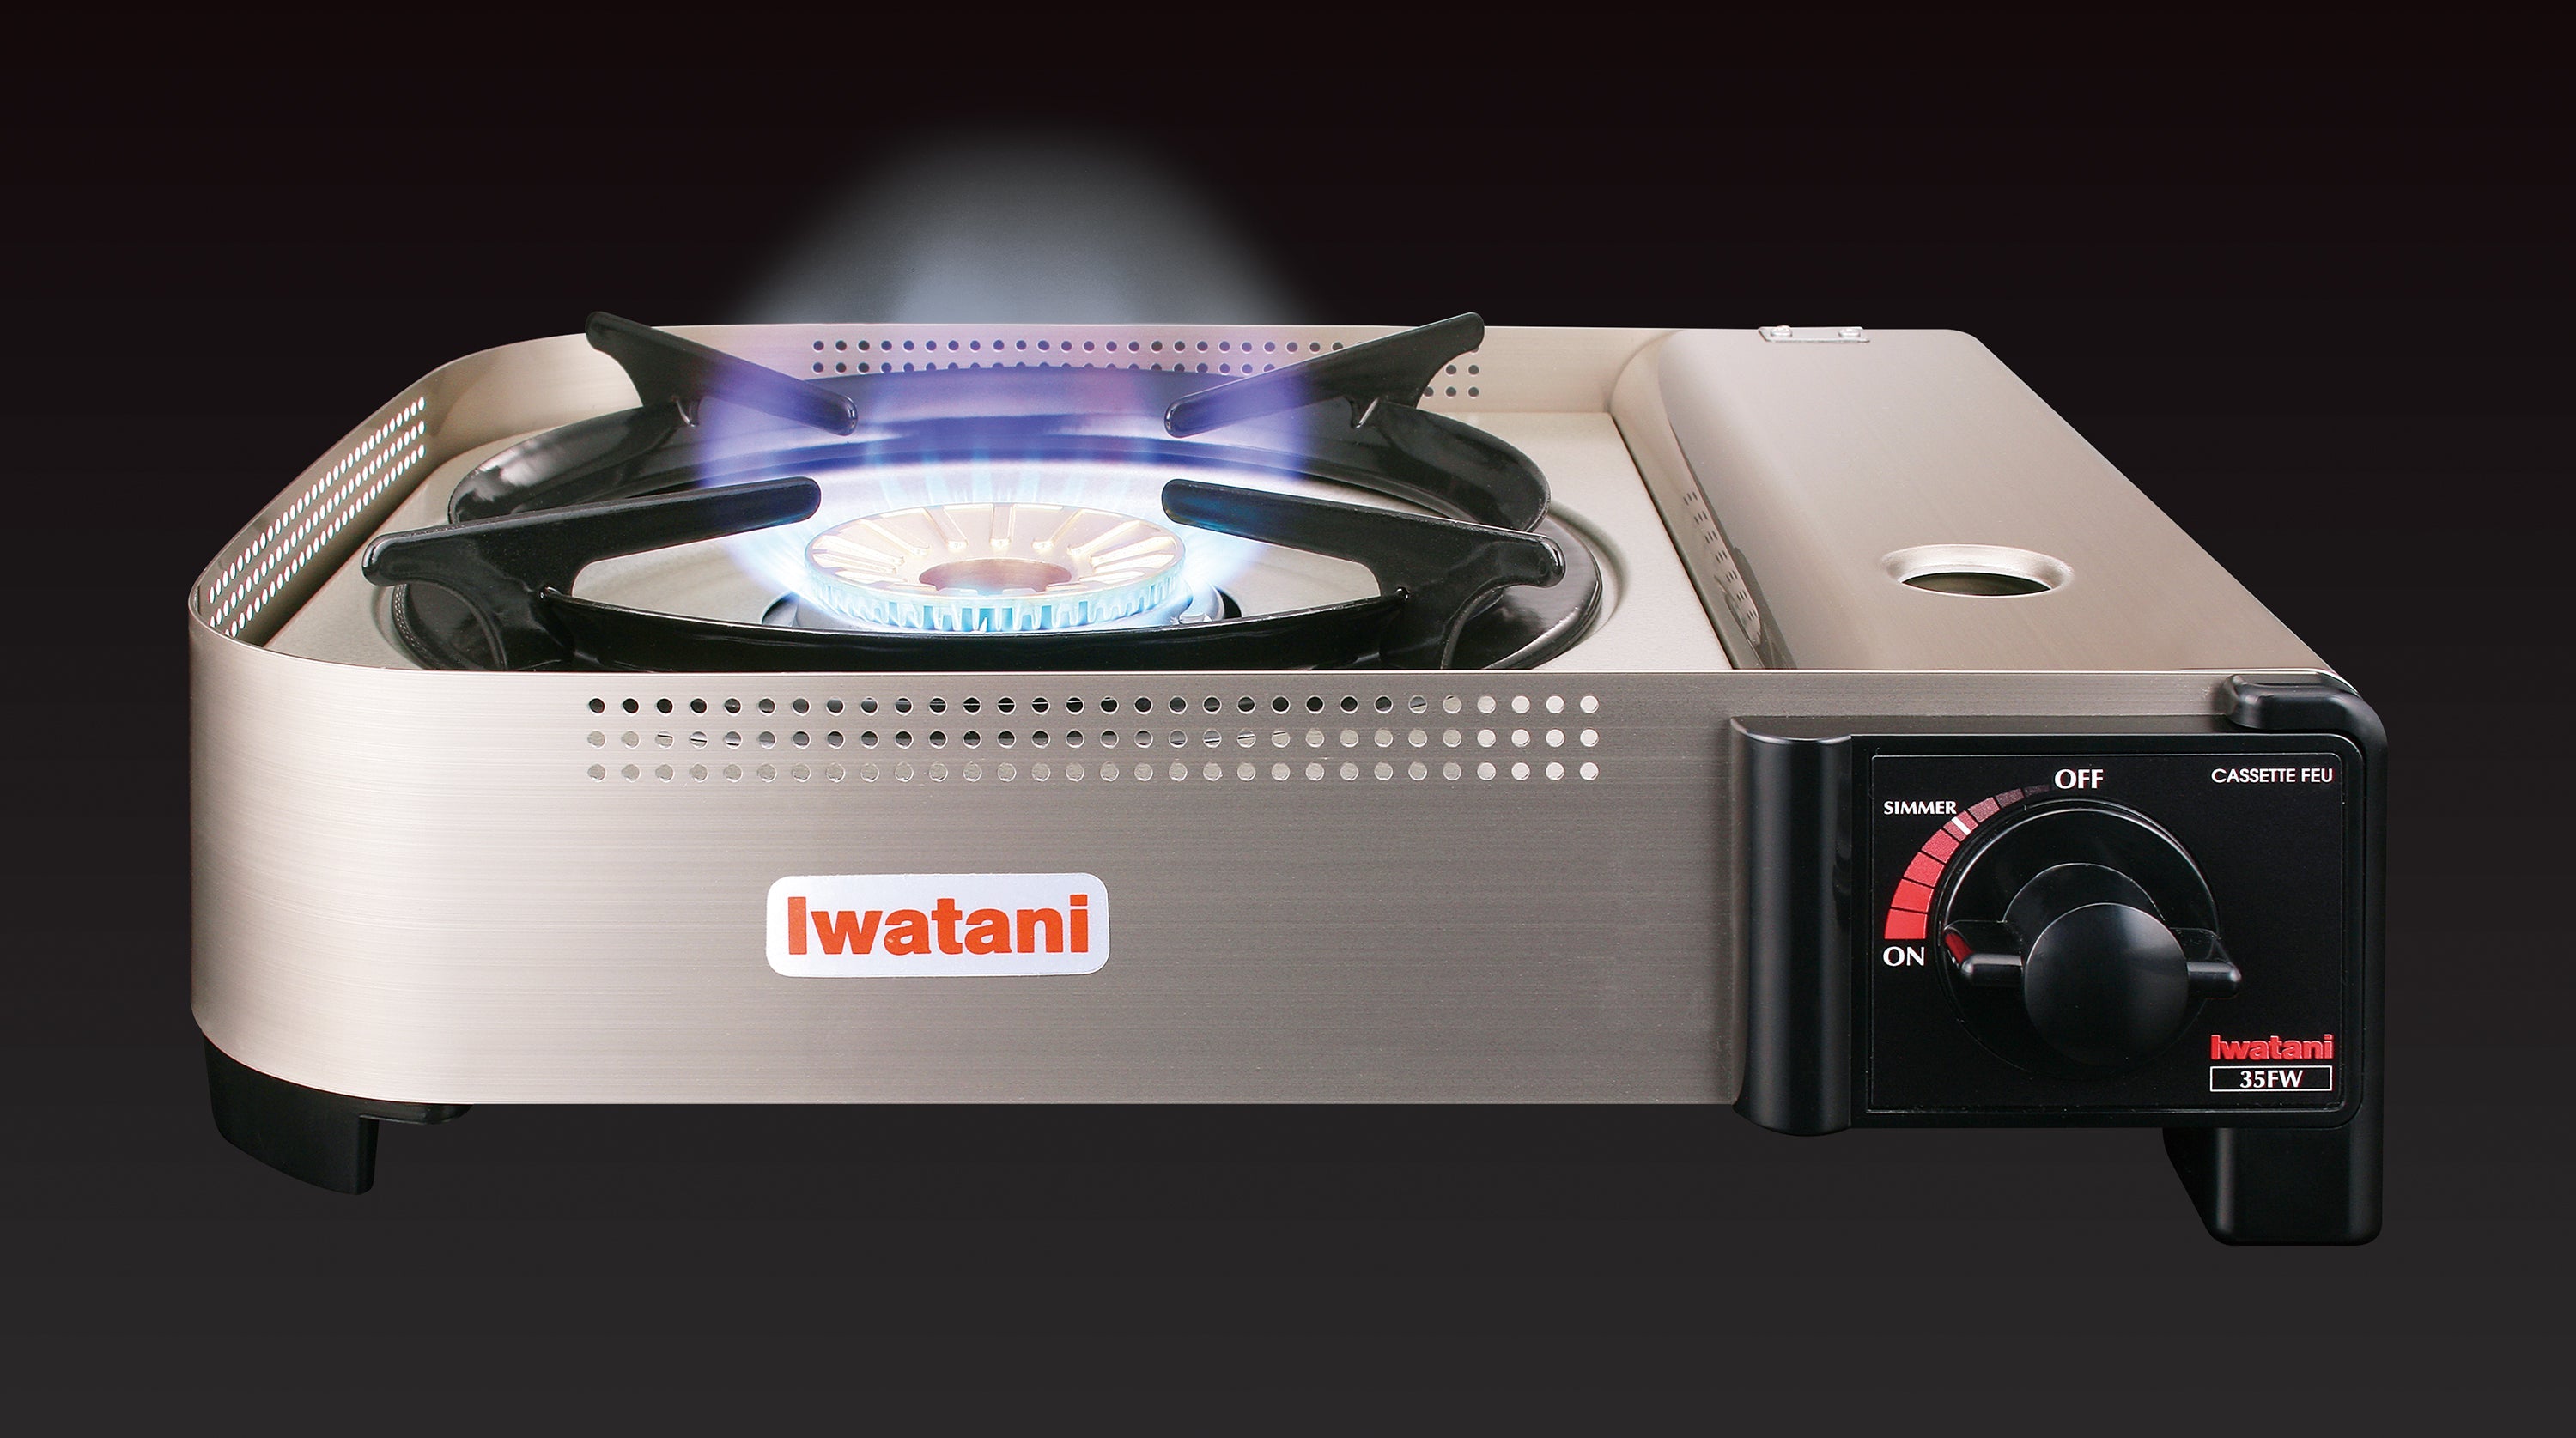 Are cassette butane stoves safe to use indoors? I have an Iwatani